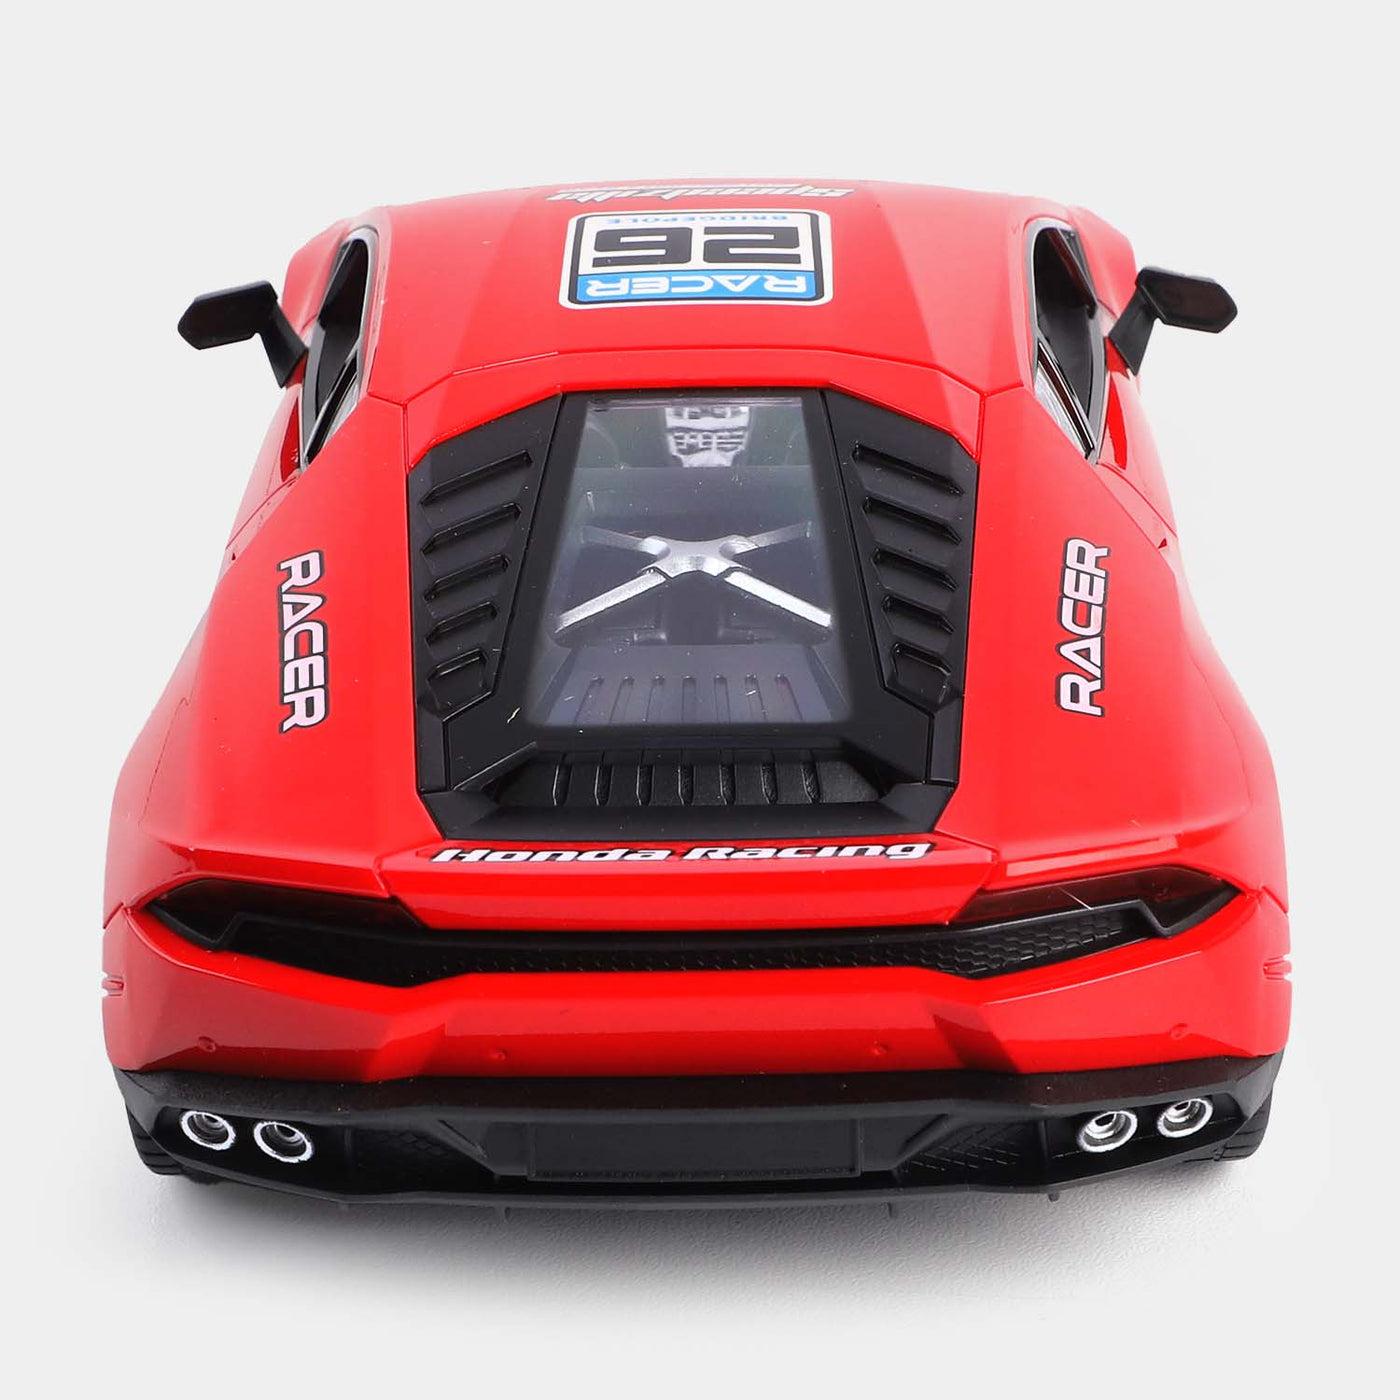 REMOTE CONTROL RACING CHAMPION CAR WITH LIGHT FOR KIDS